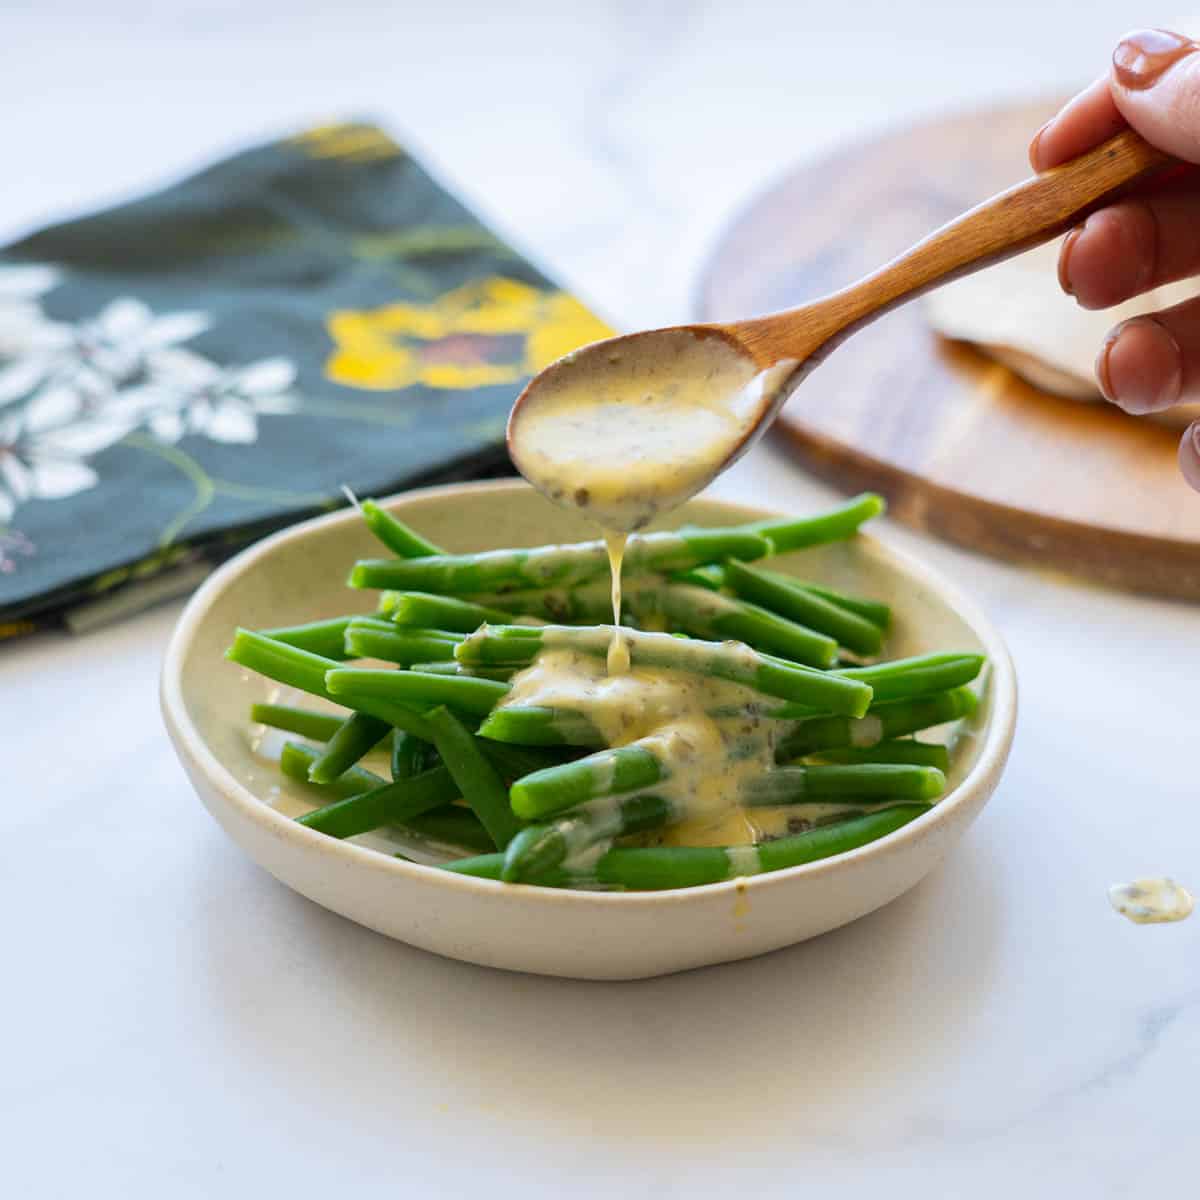 A yellow sauce being drizzled over green beans from a wooden spoon.